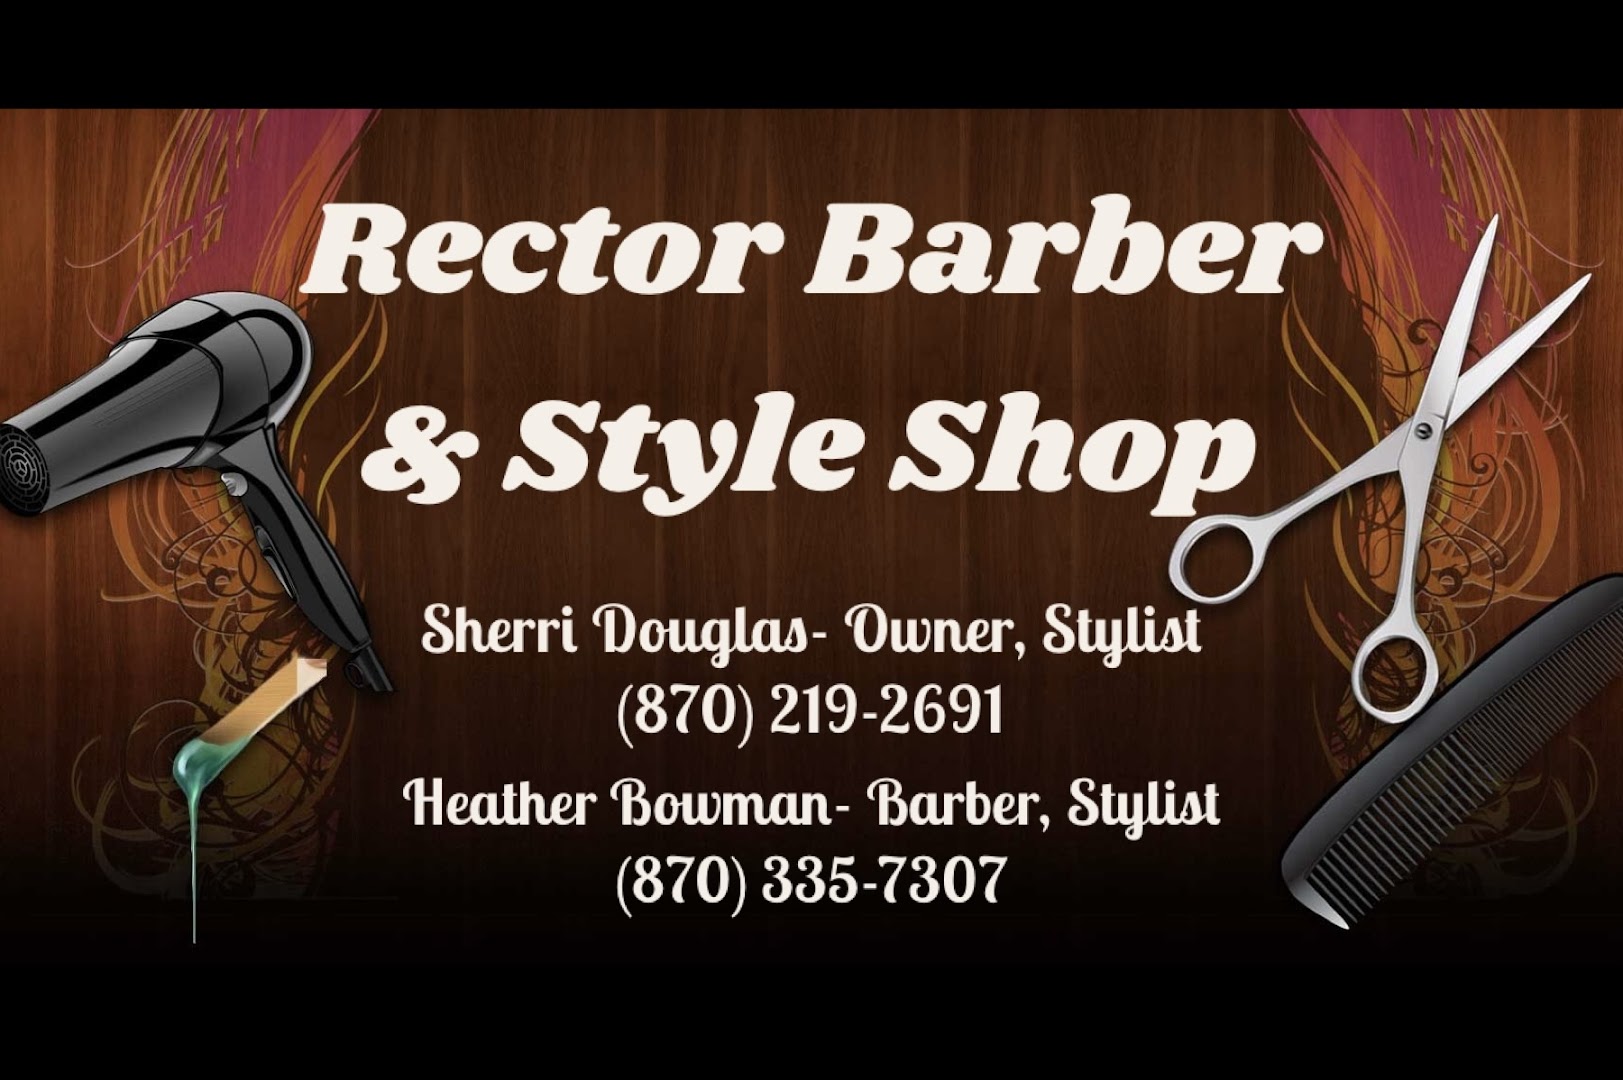 Rector Barber & Style Shop